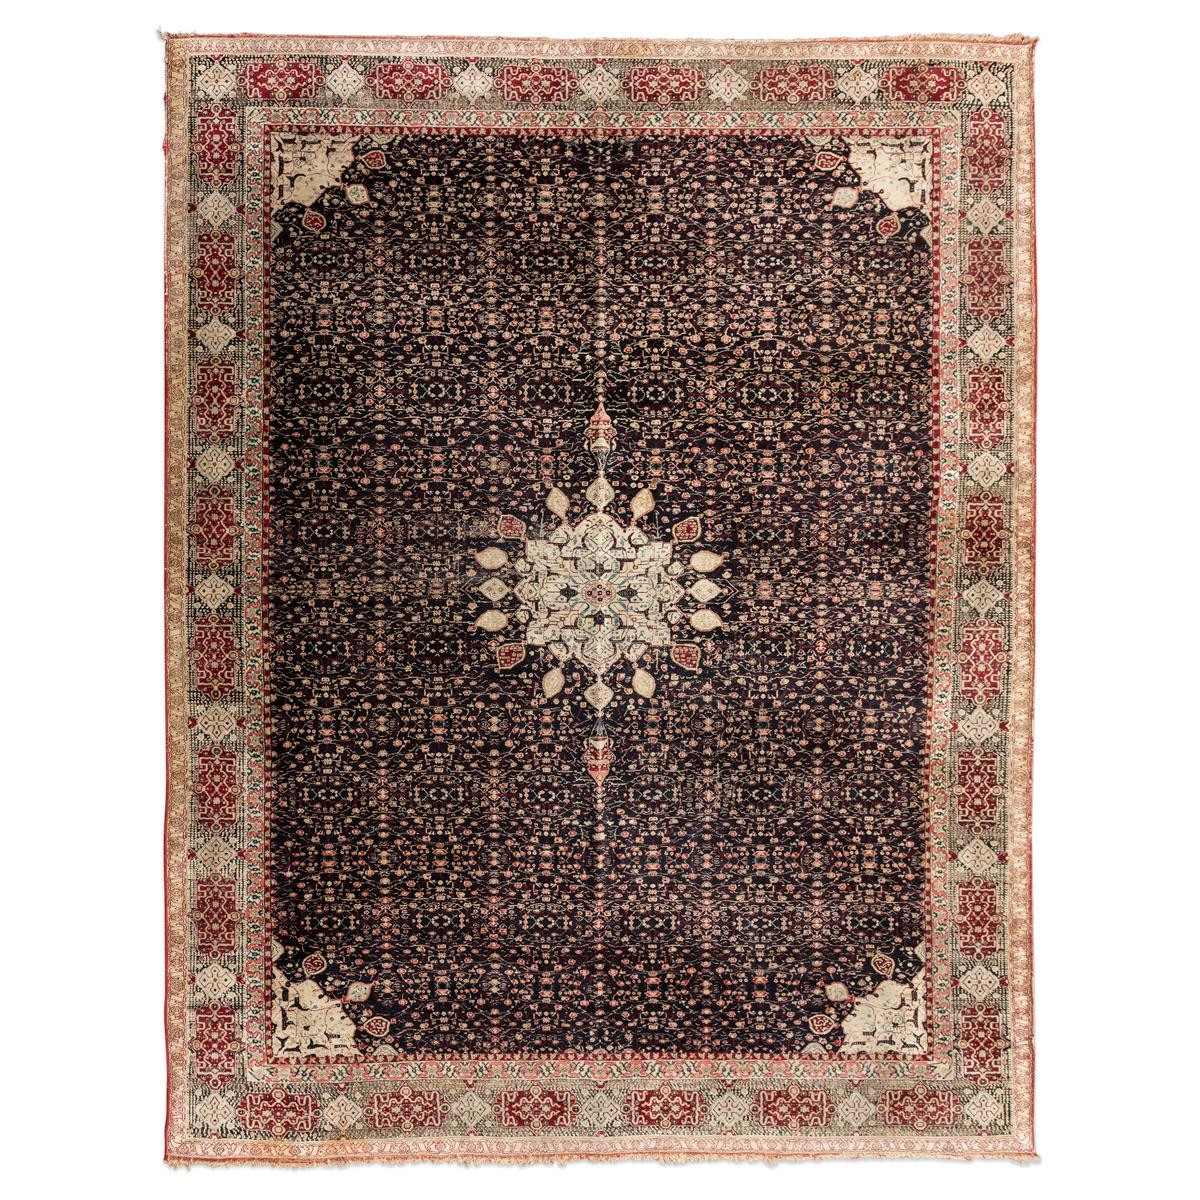 Indian rug from the city of Agra.Circa 1930.
- It was made for the English market of the time, hence the colors used.
- Pink, red and dark blue very elegant.
- Design with central medallion and two motif lamps on very elaborate fieldwork.
- It's a